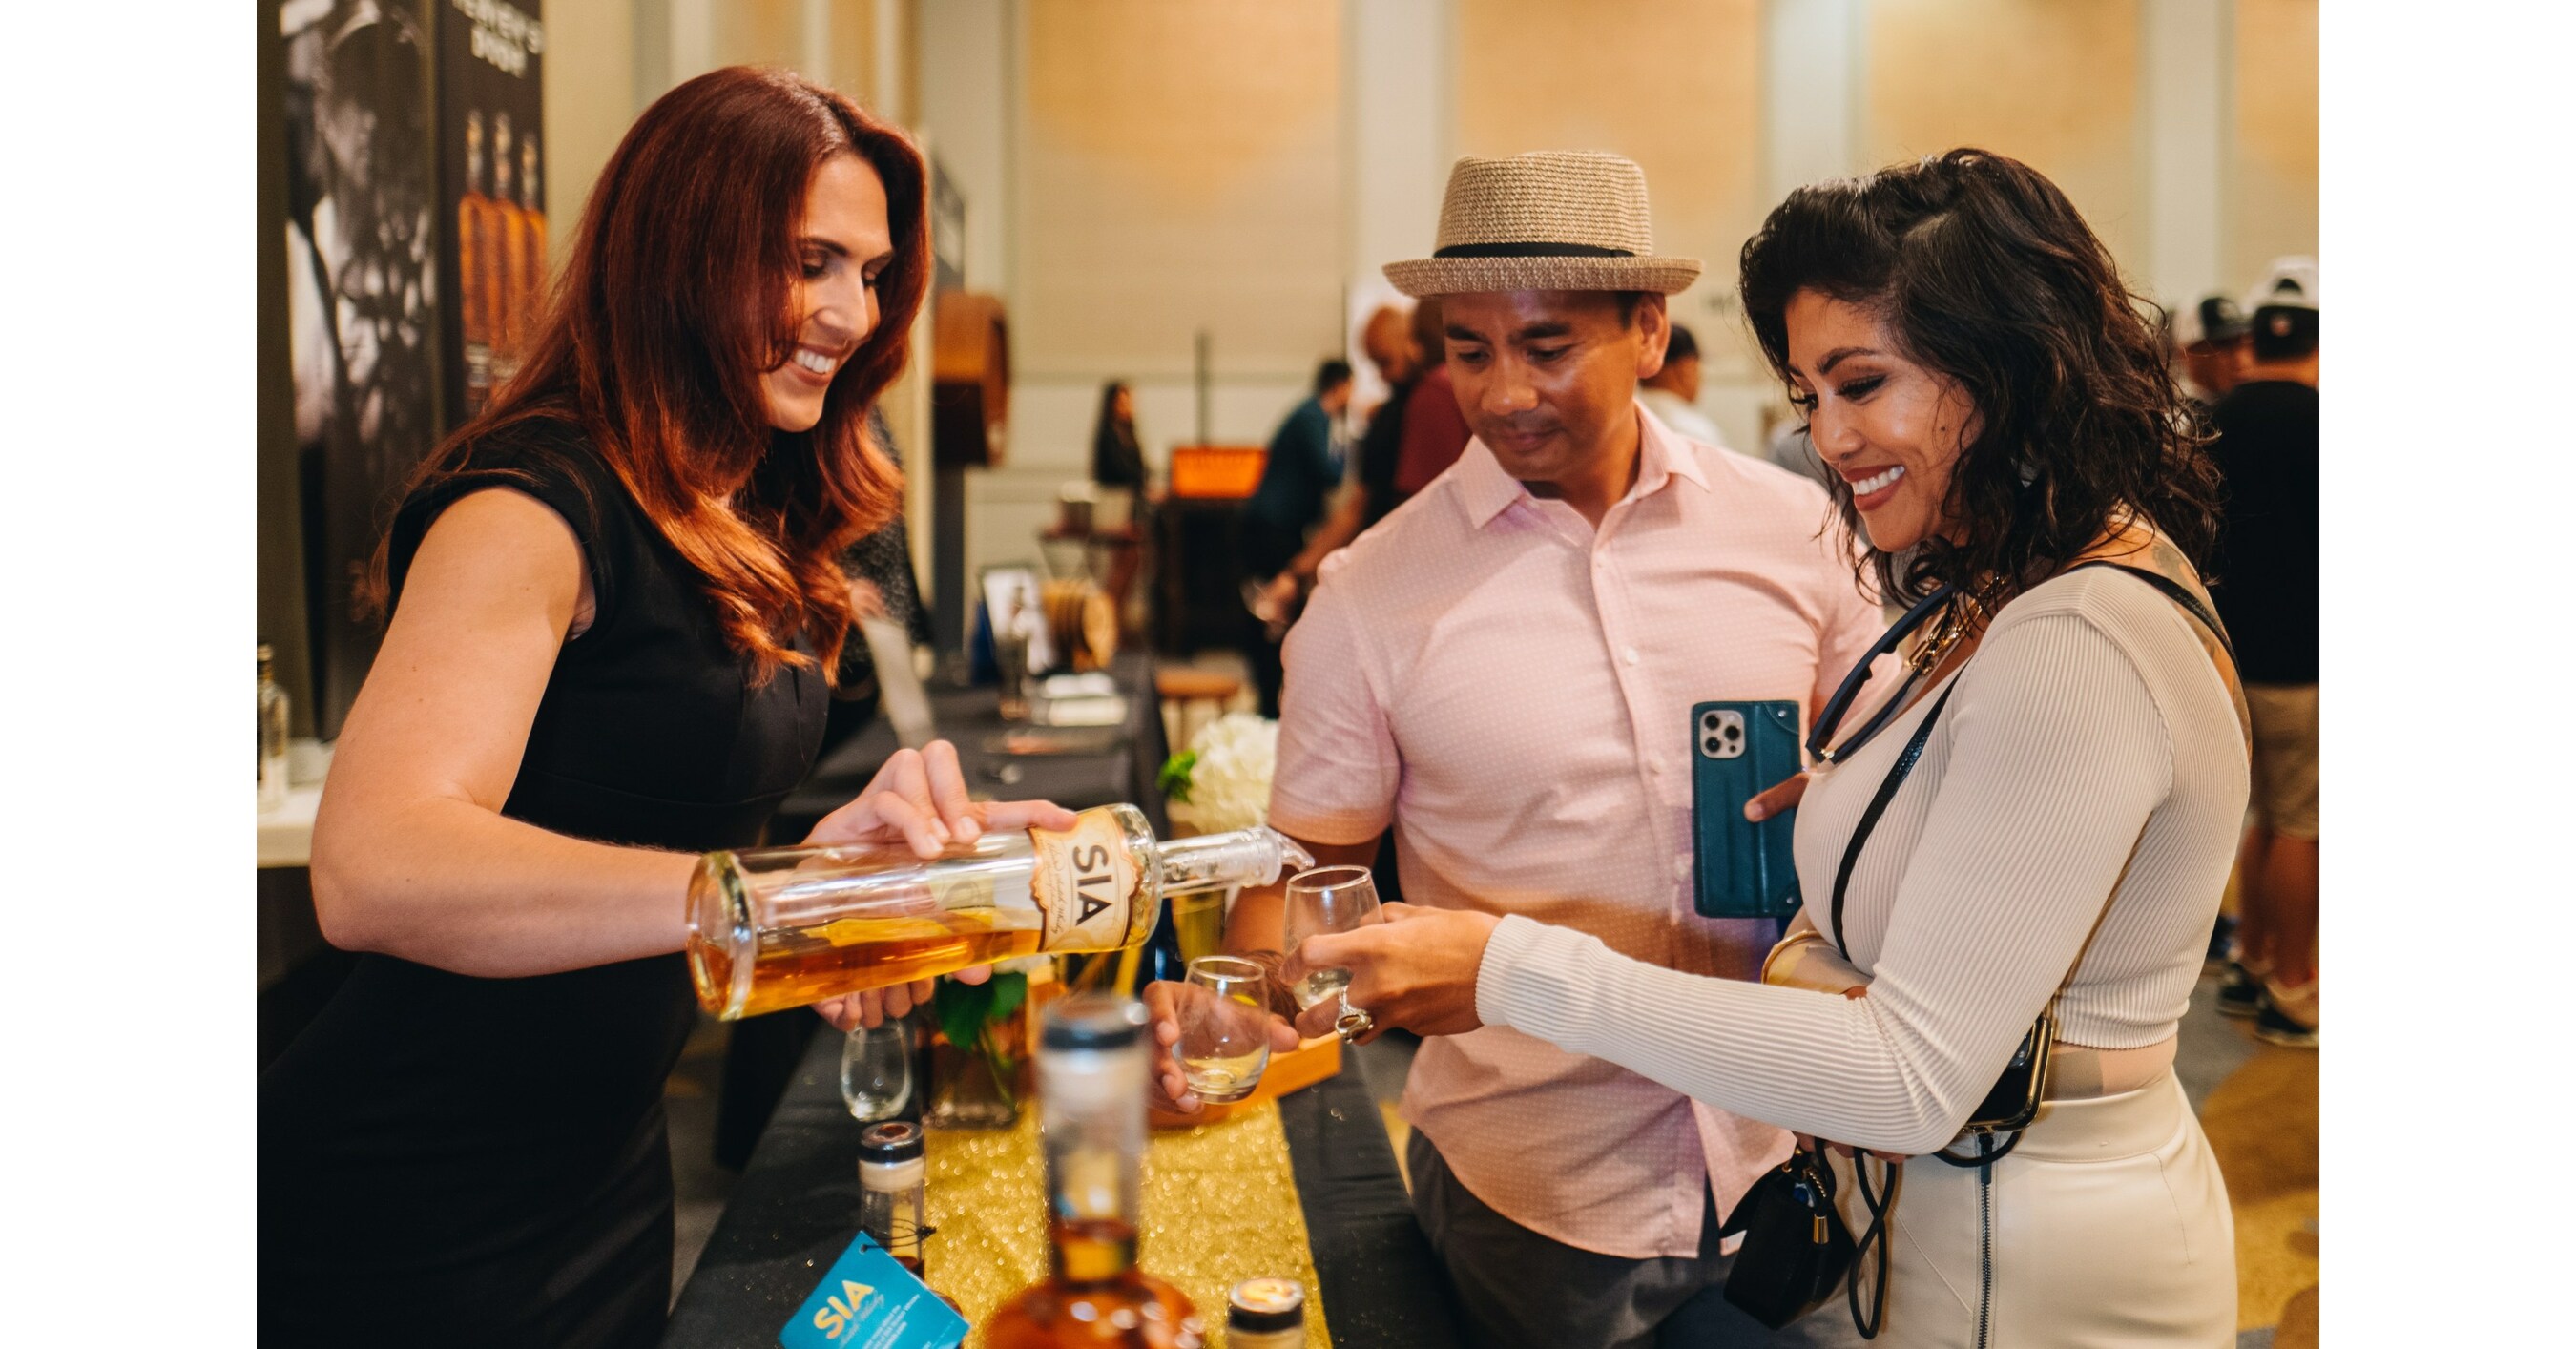 Whisky EDU Presents “The Art of Whiskey,” an Inaugural Whisky and Cigar Festival to Debut in Las Vegas During Super Bowl Week